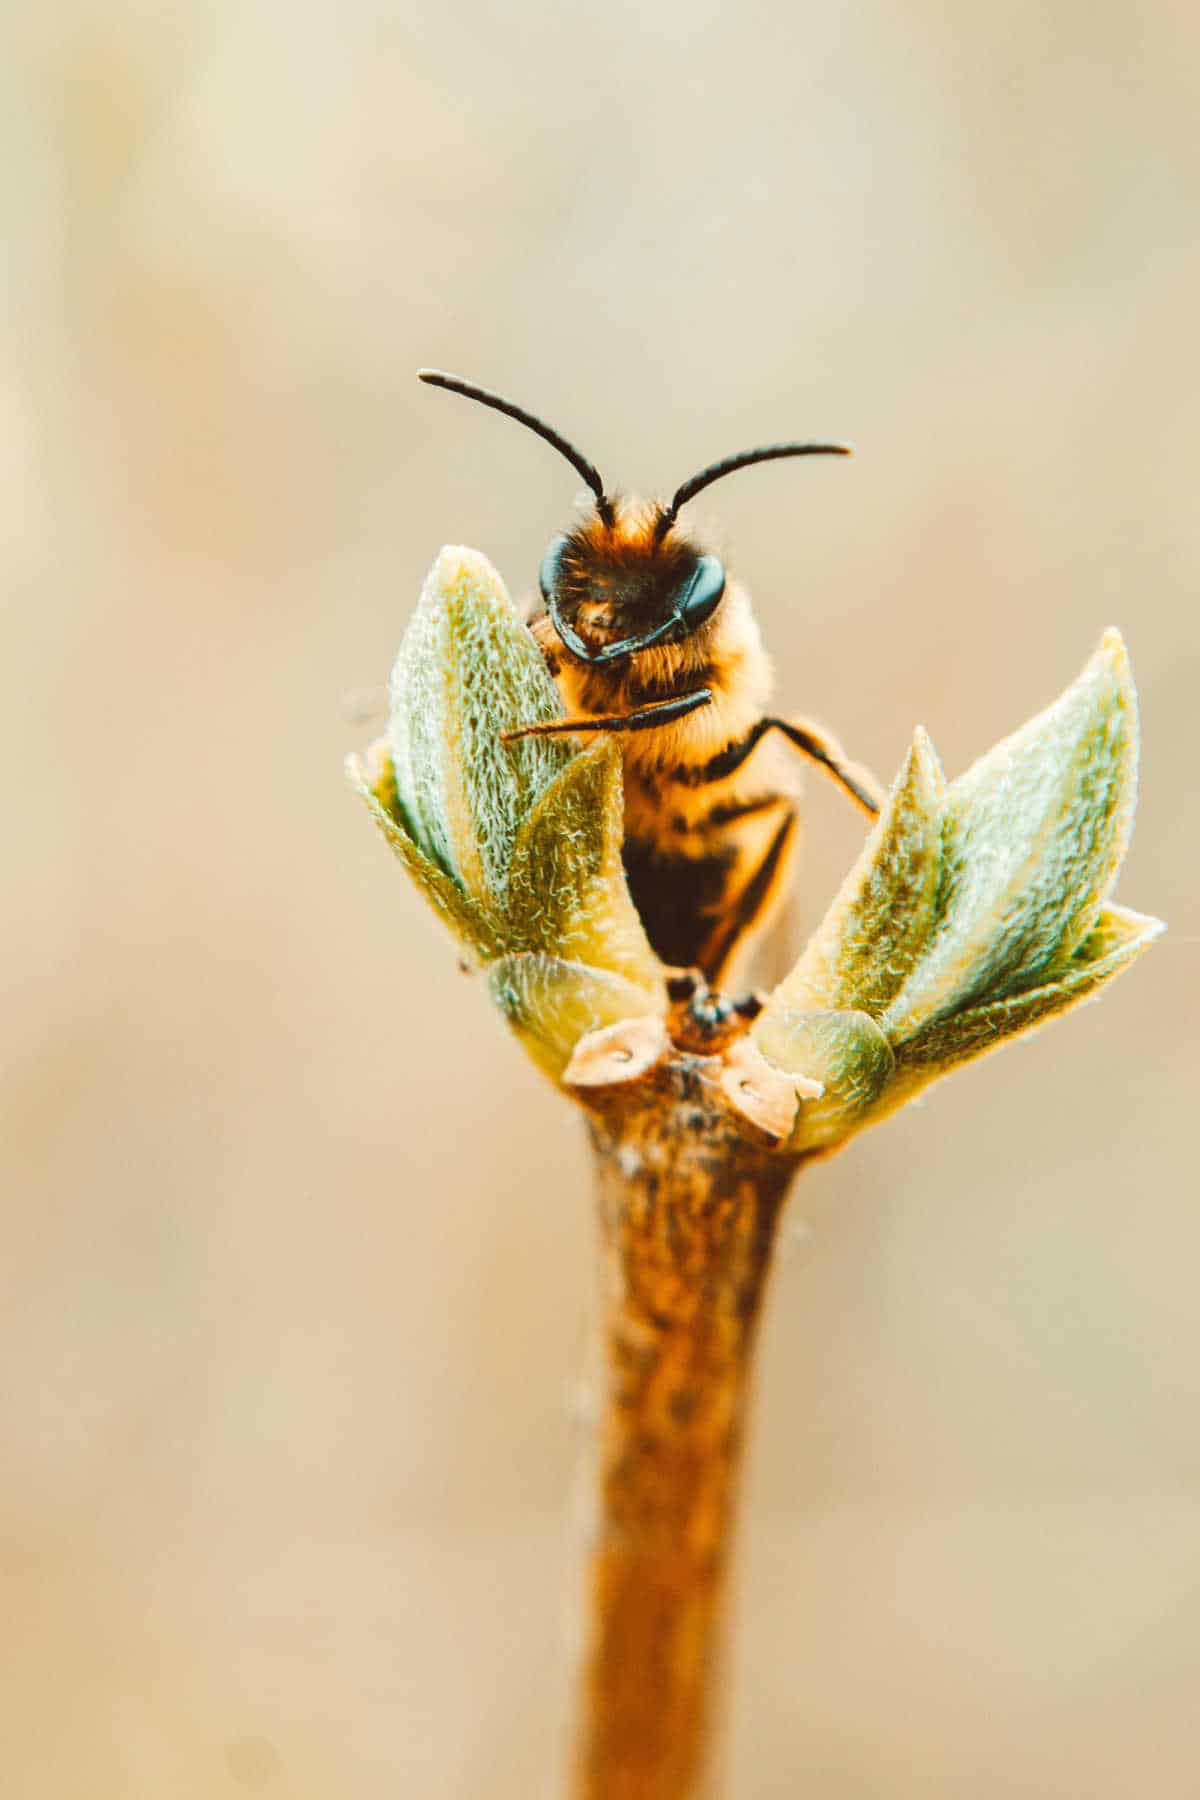 Honey bee on the bud of a plant